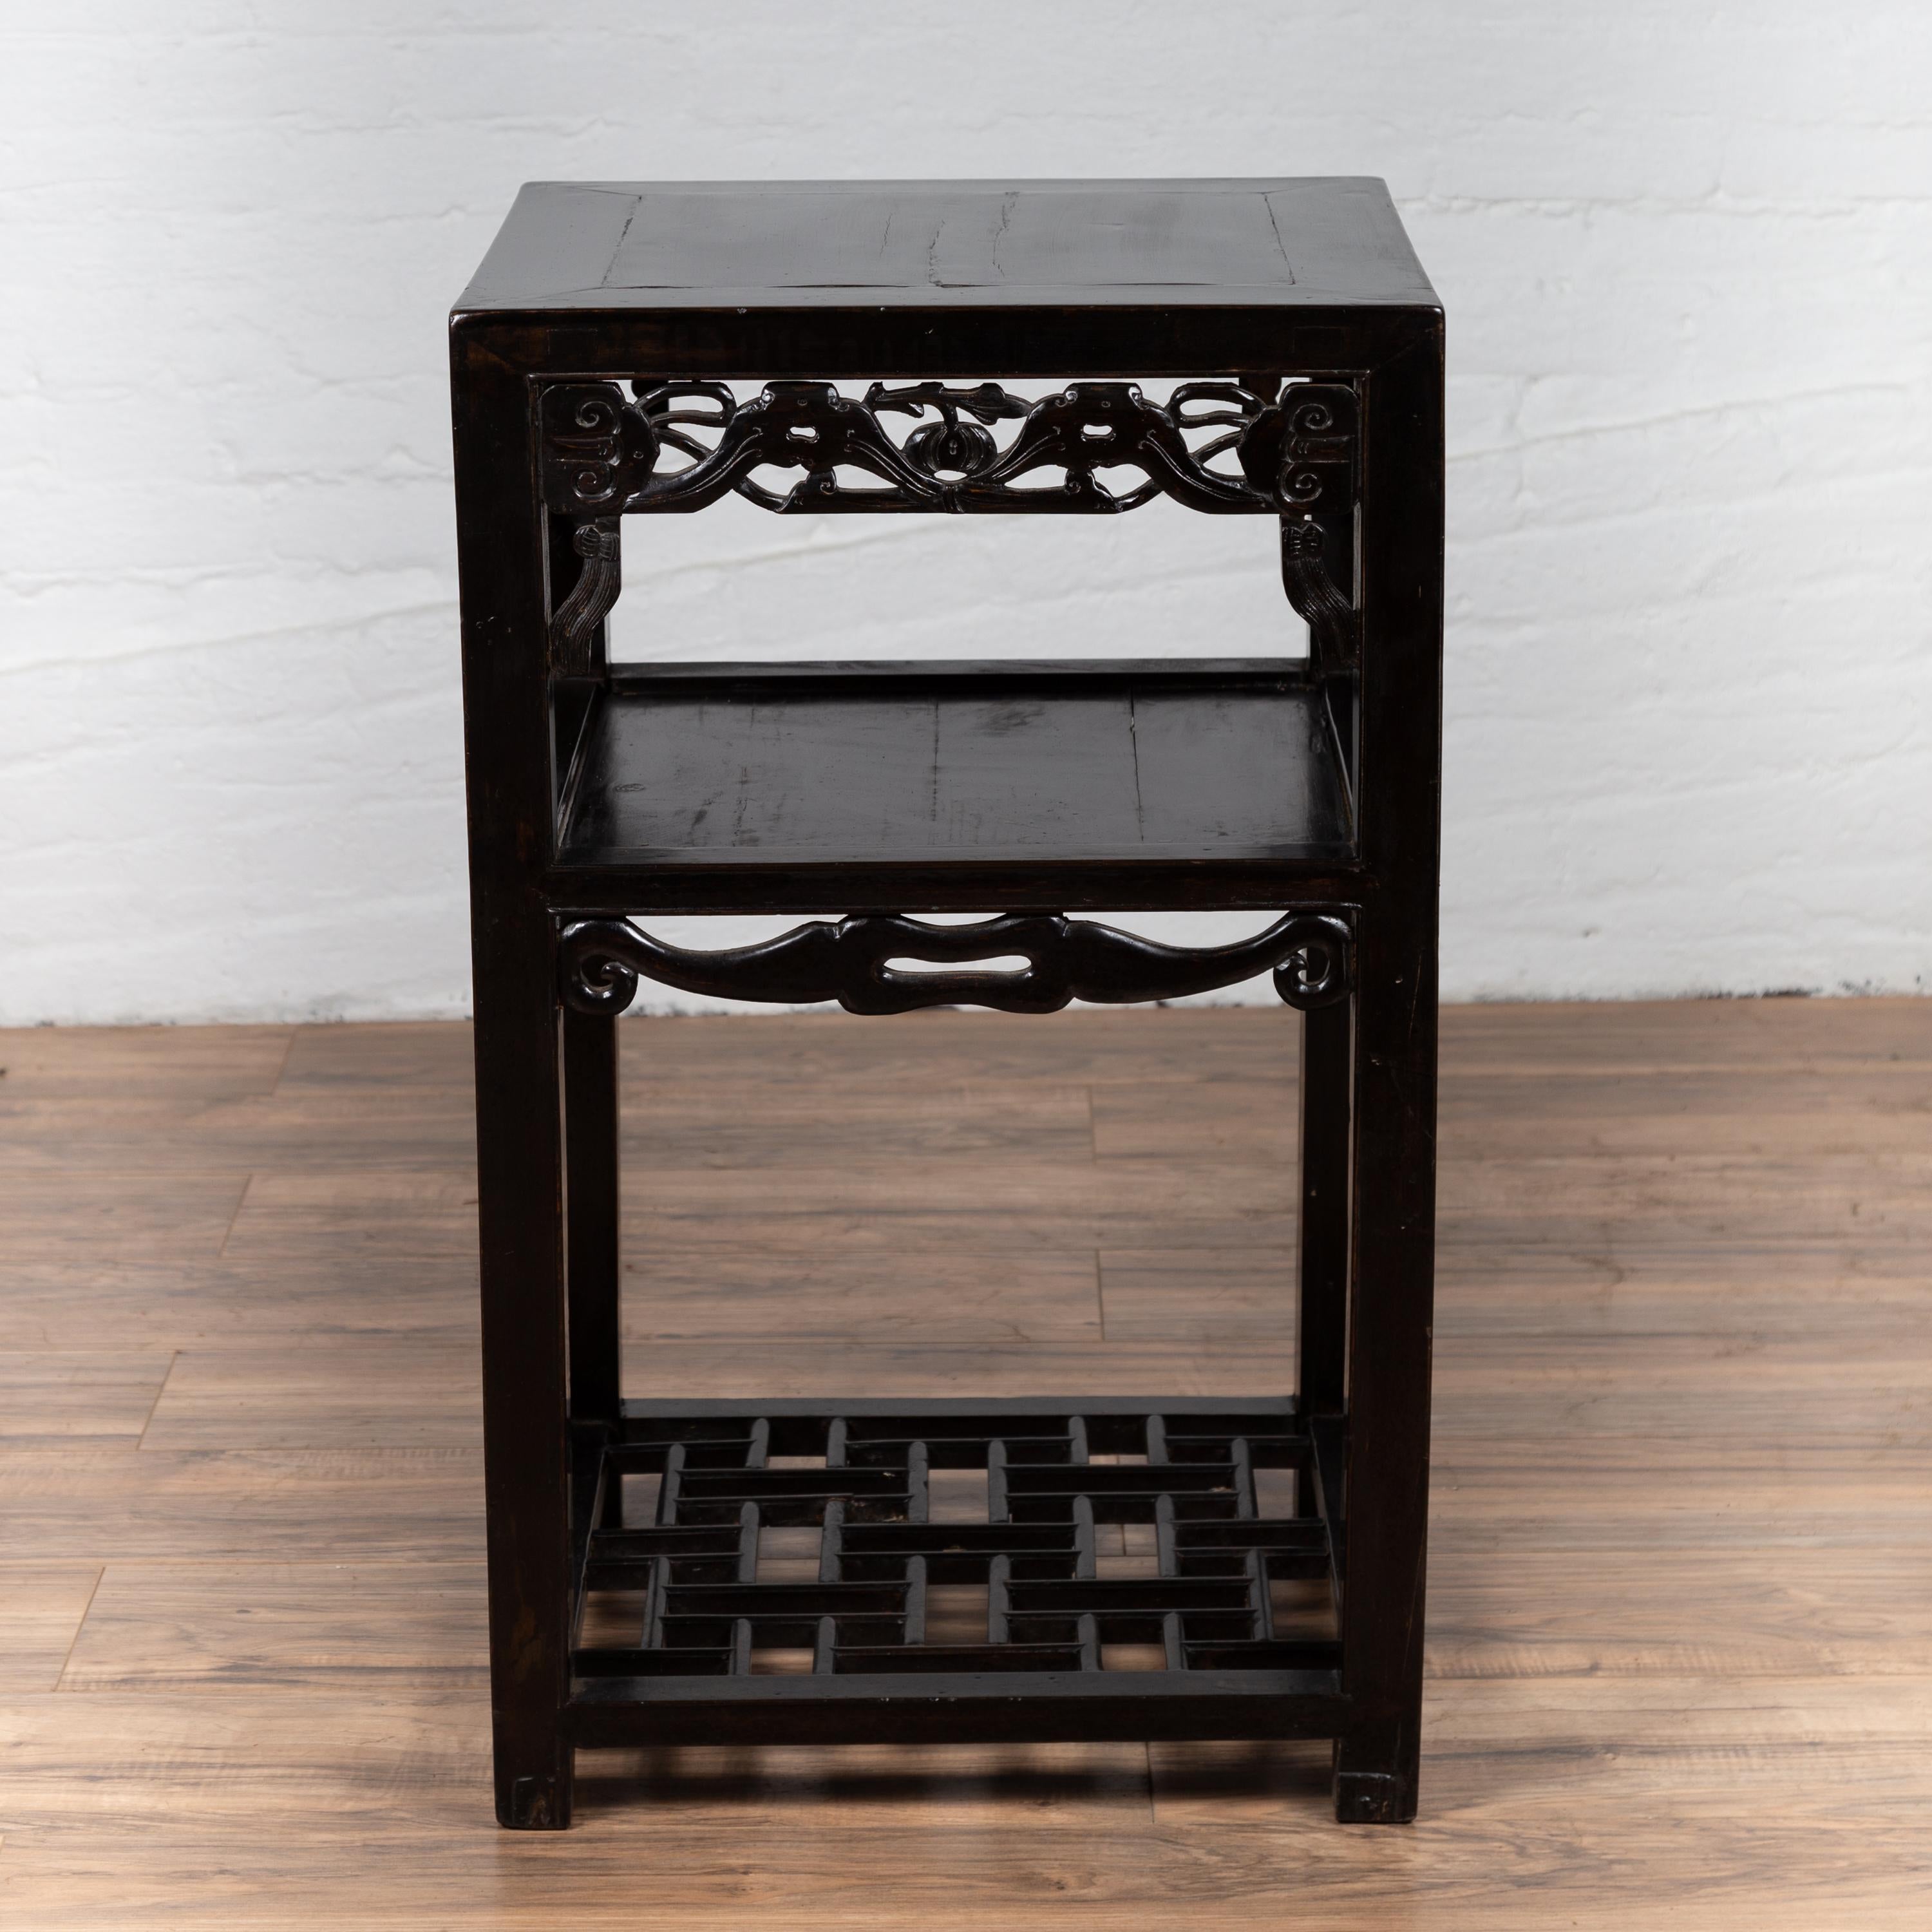 Carved Antique Chinese Lamp Table with Dark Patina, Pierced Apron and Geometric Design